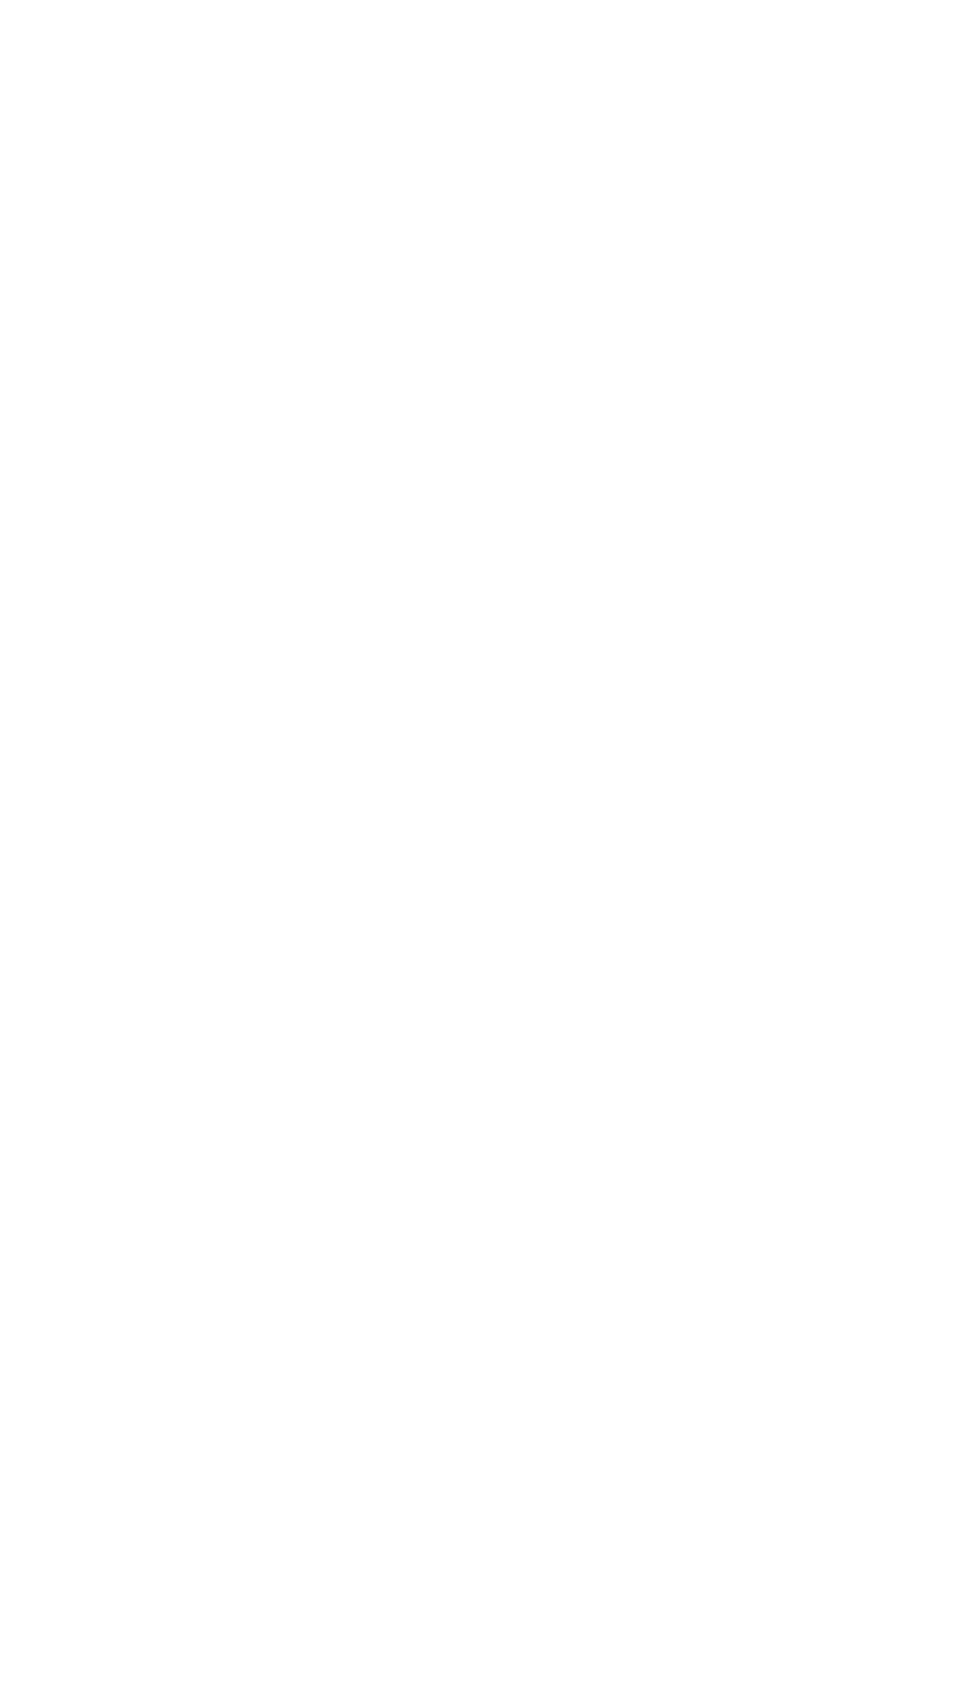 Allure Beauty Experts Award White